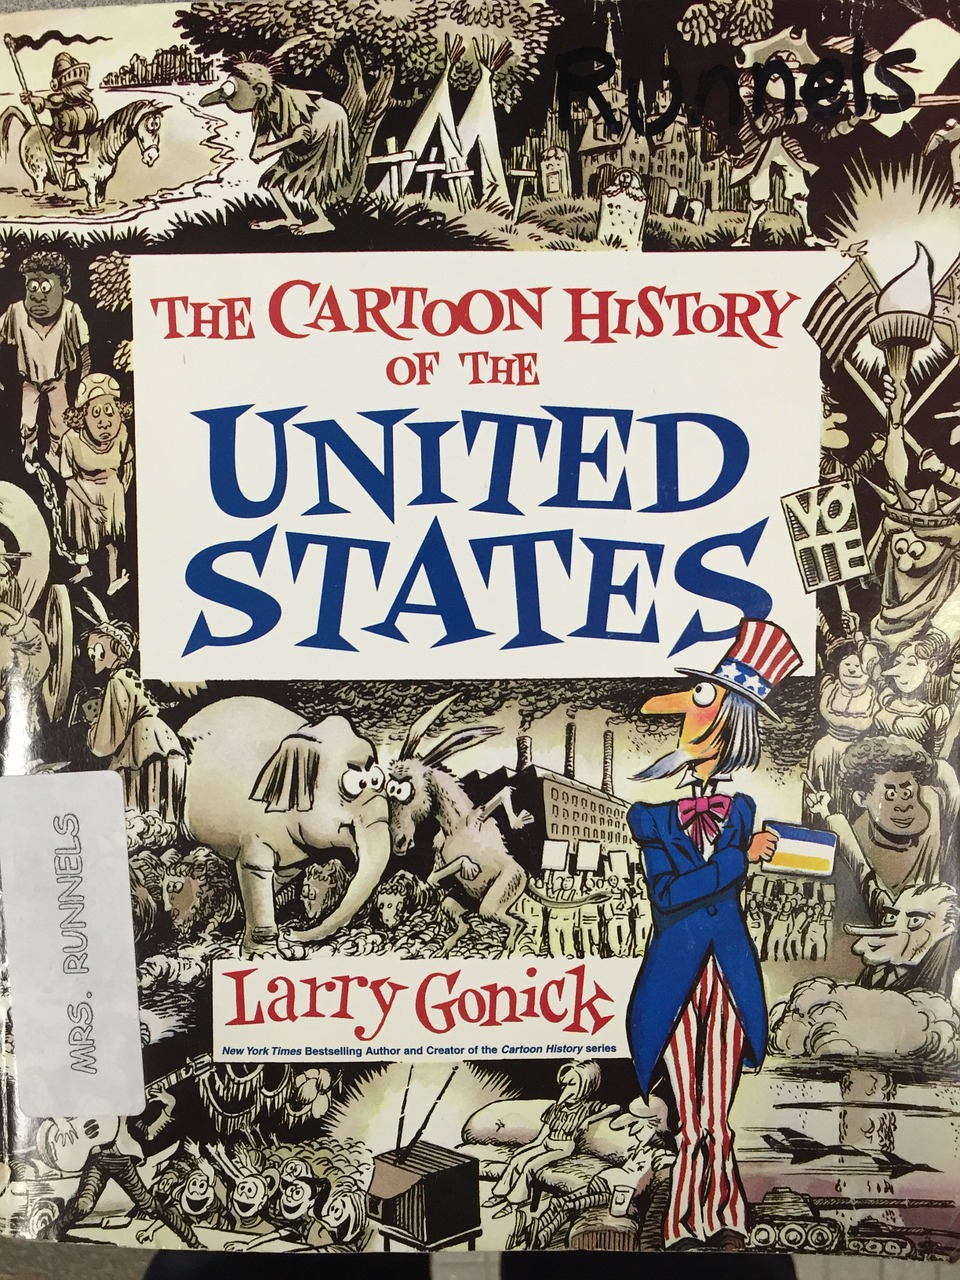 Graphic novel,american history,nonfiction,book,cover free image from